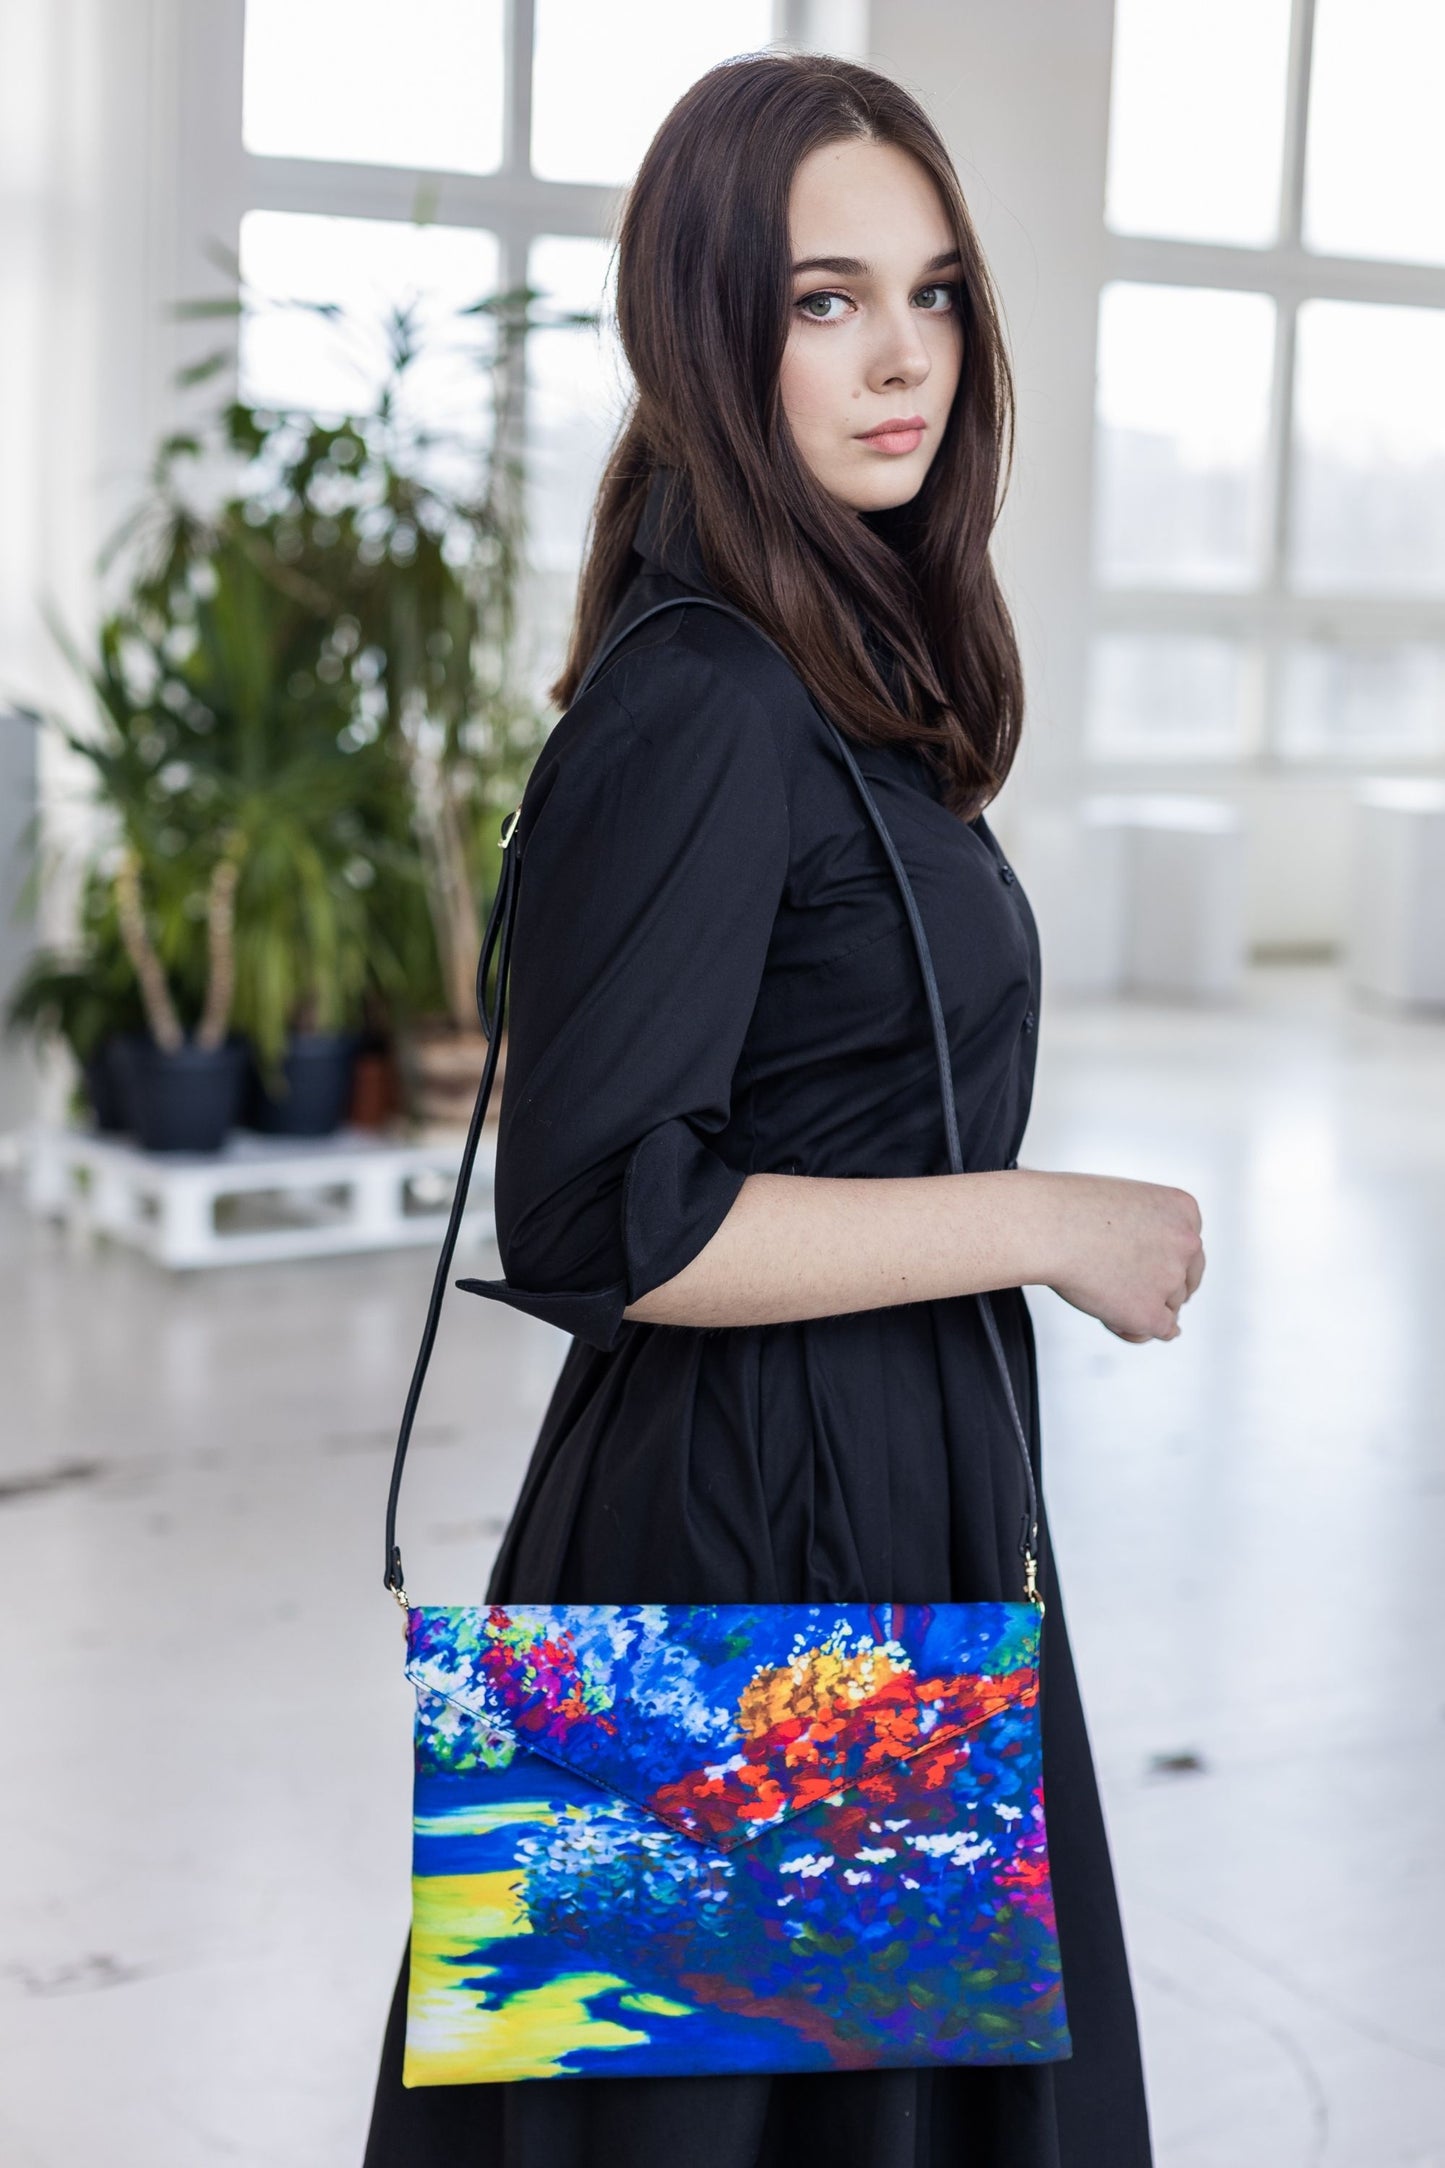 Handbag with painted floral print